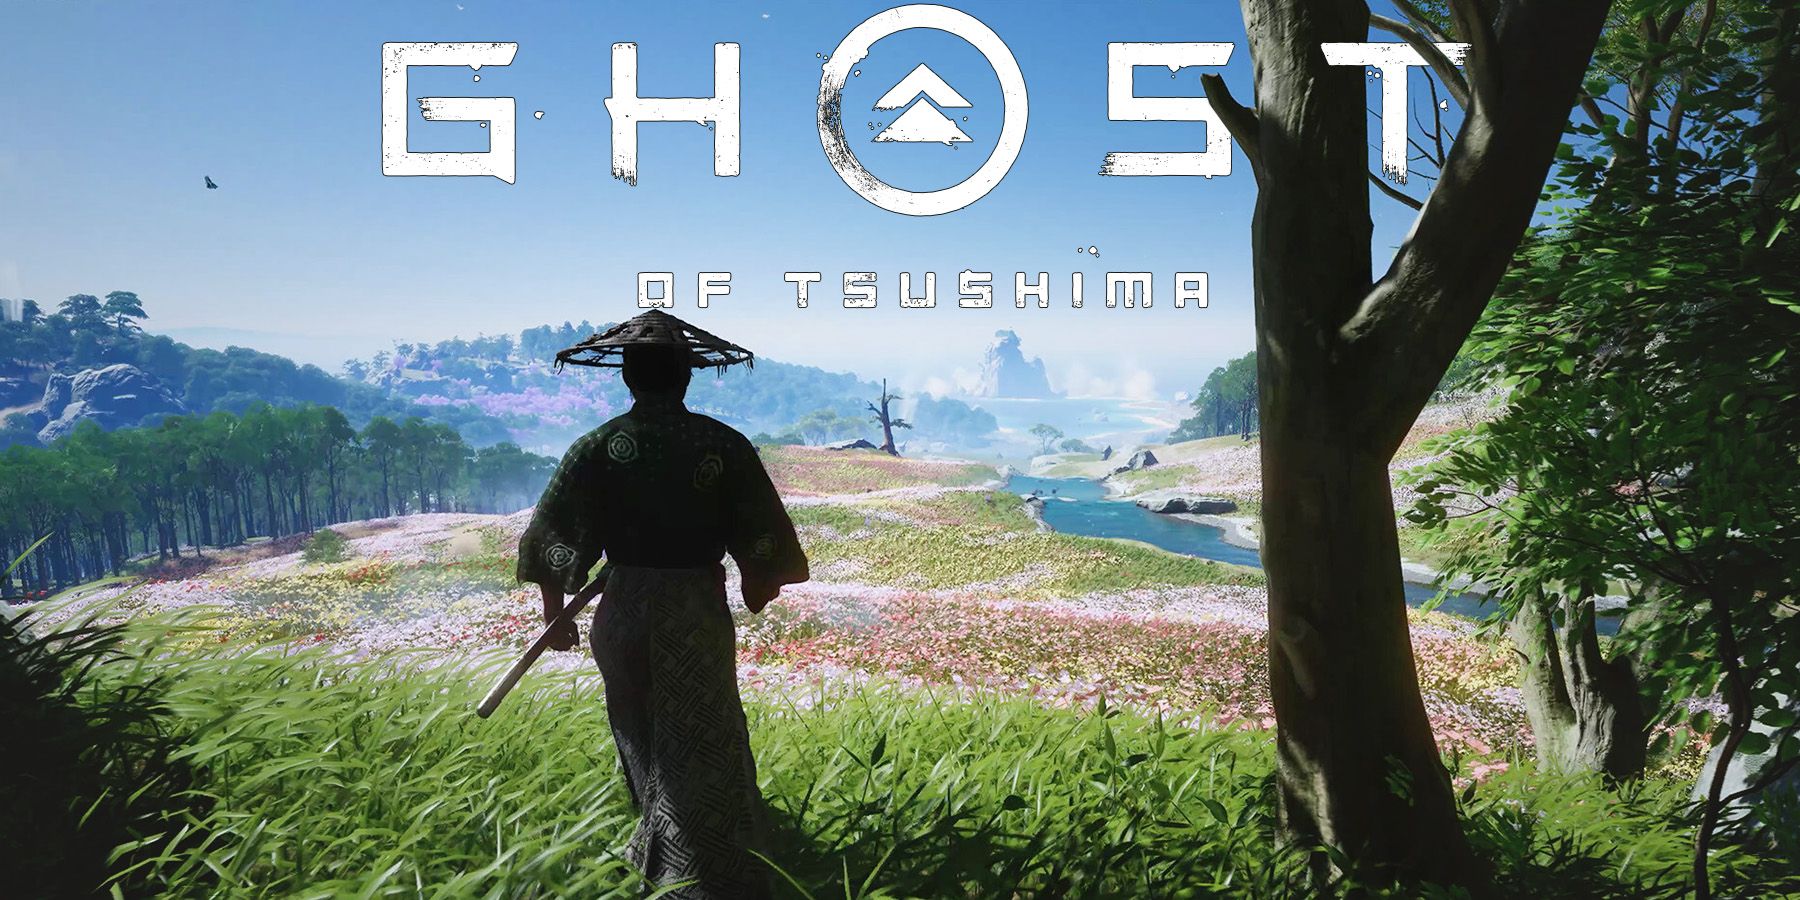 Ghost of Tsushima meadow forest exit scenery with game logo flat shadow edit promo screenshot